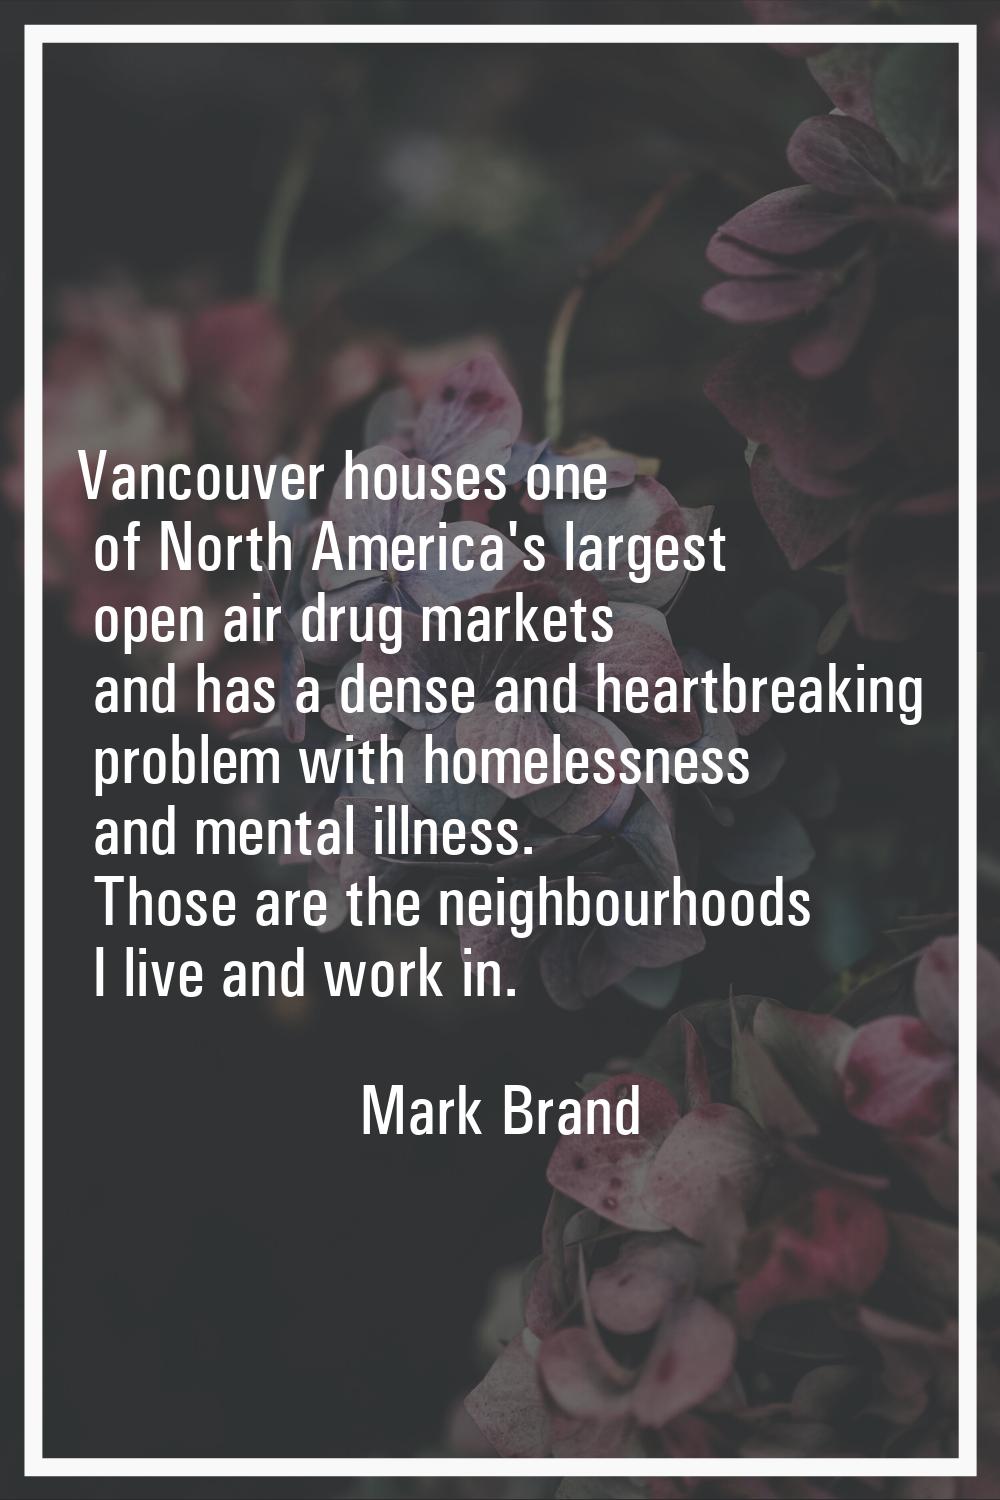 Vancouver houses one of North America's largest open air drug markets and has a dense and heartbrea